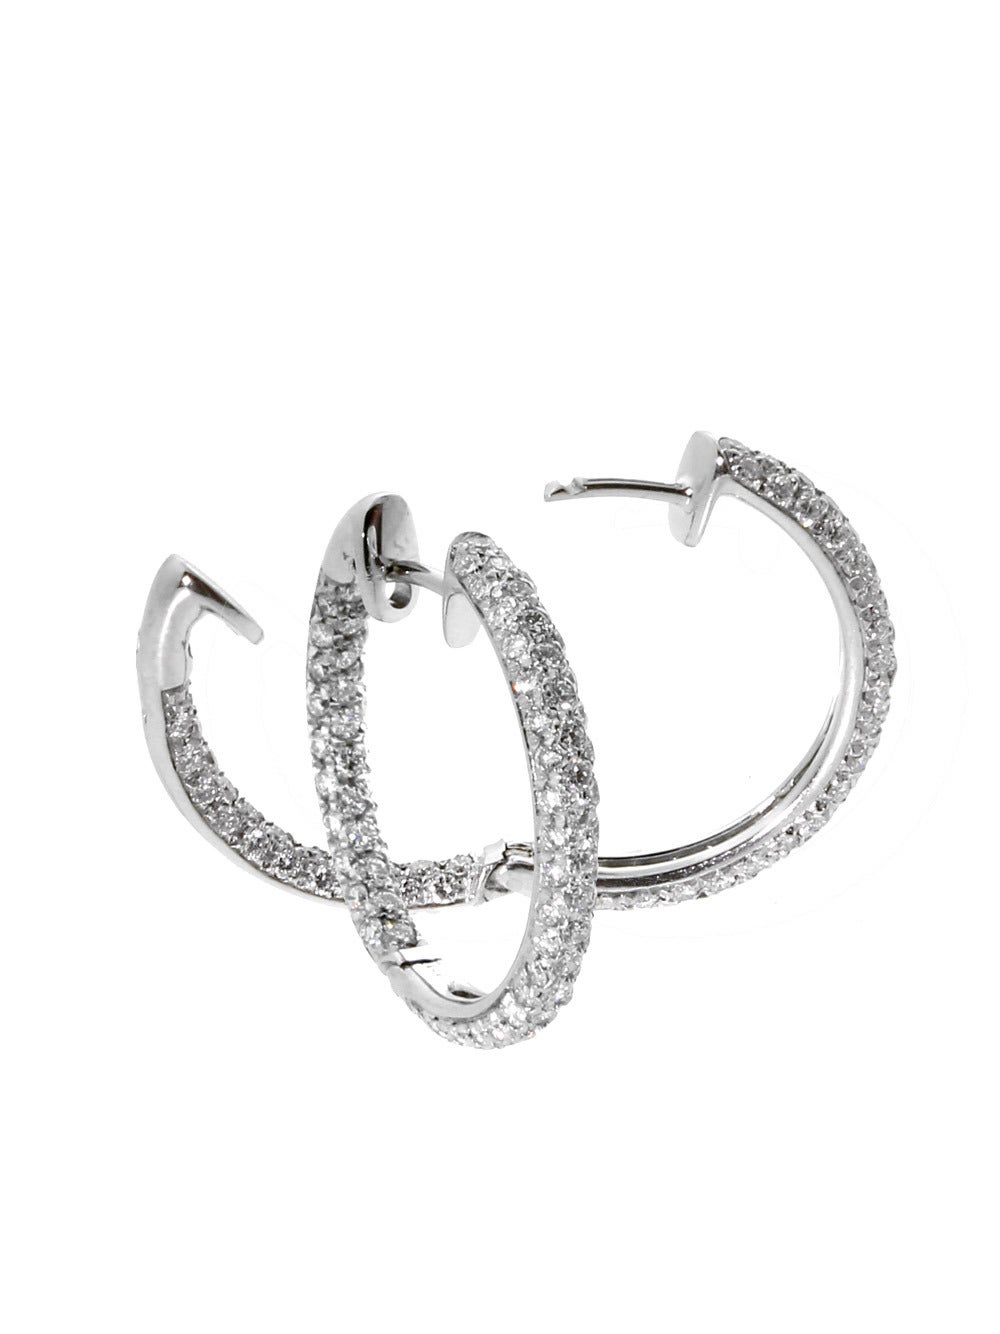 A plethora of diamonds set in these 18k White Gold diamond hoop earrings by Harry Winston. The earrings are set with appx 2.5ct of Round Brilliant Cut diamond, and have a diameter of 23mm (.90